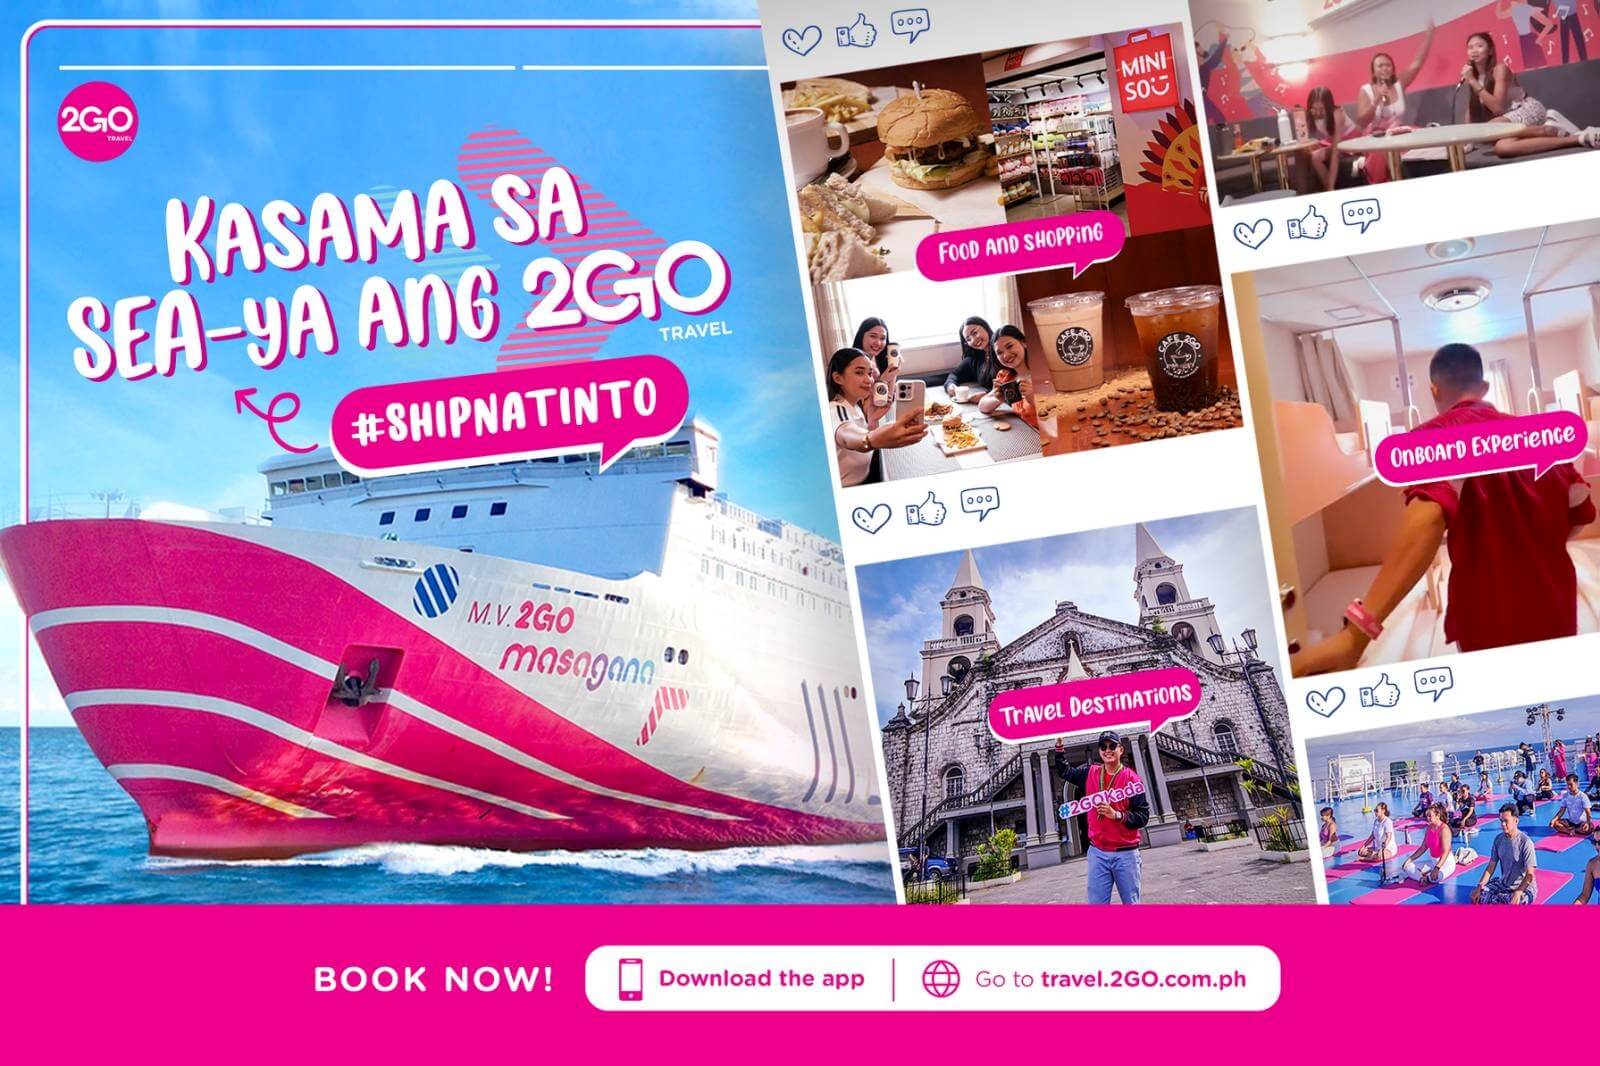 2GO Travel launches #ShipNatinTo, elevating sea travel experiences in the Philippines.